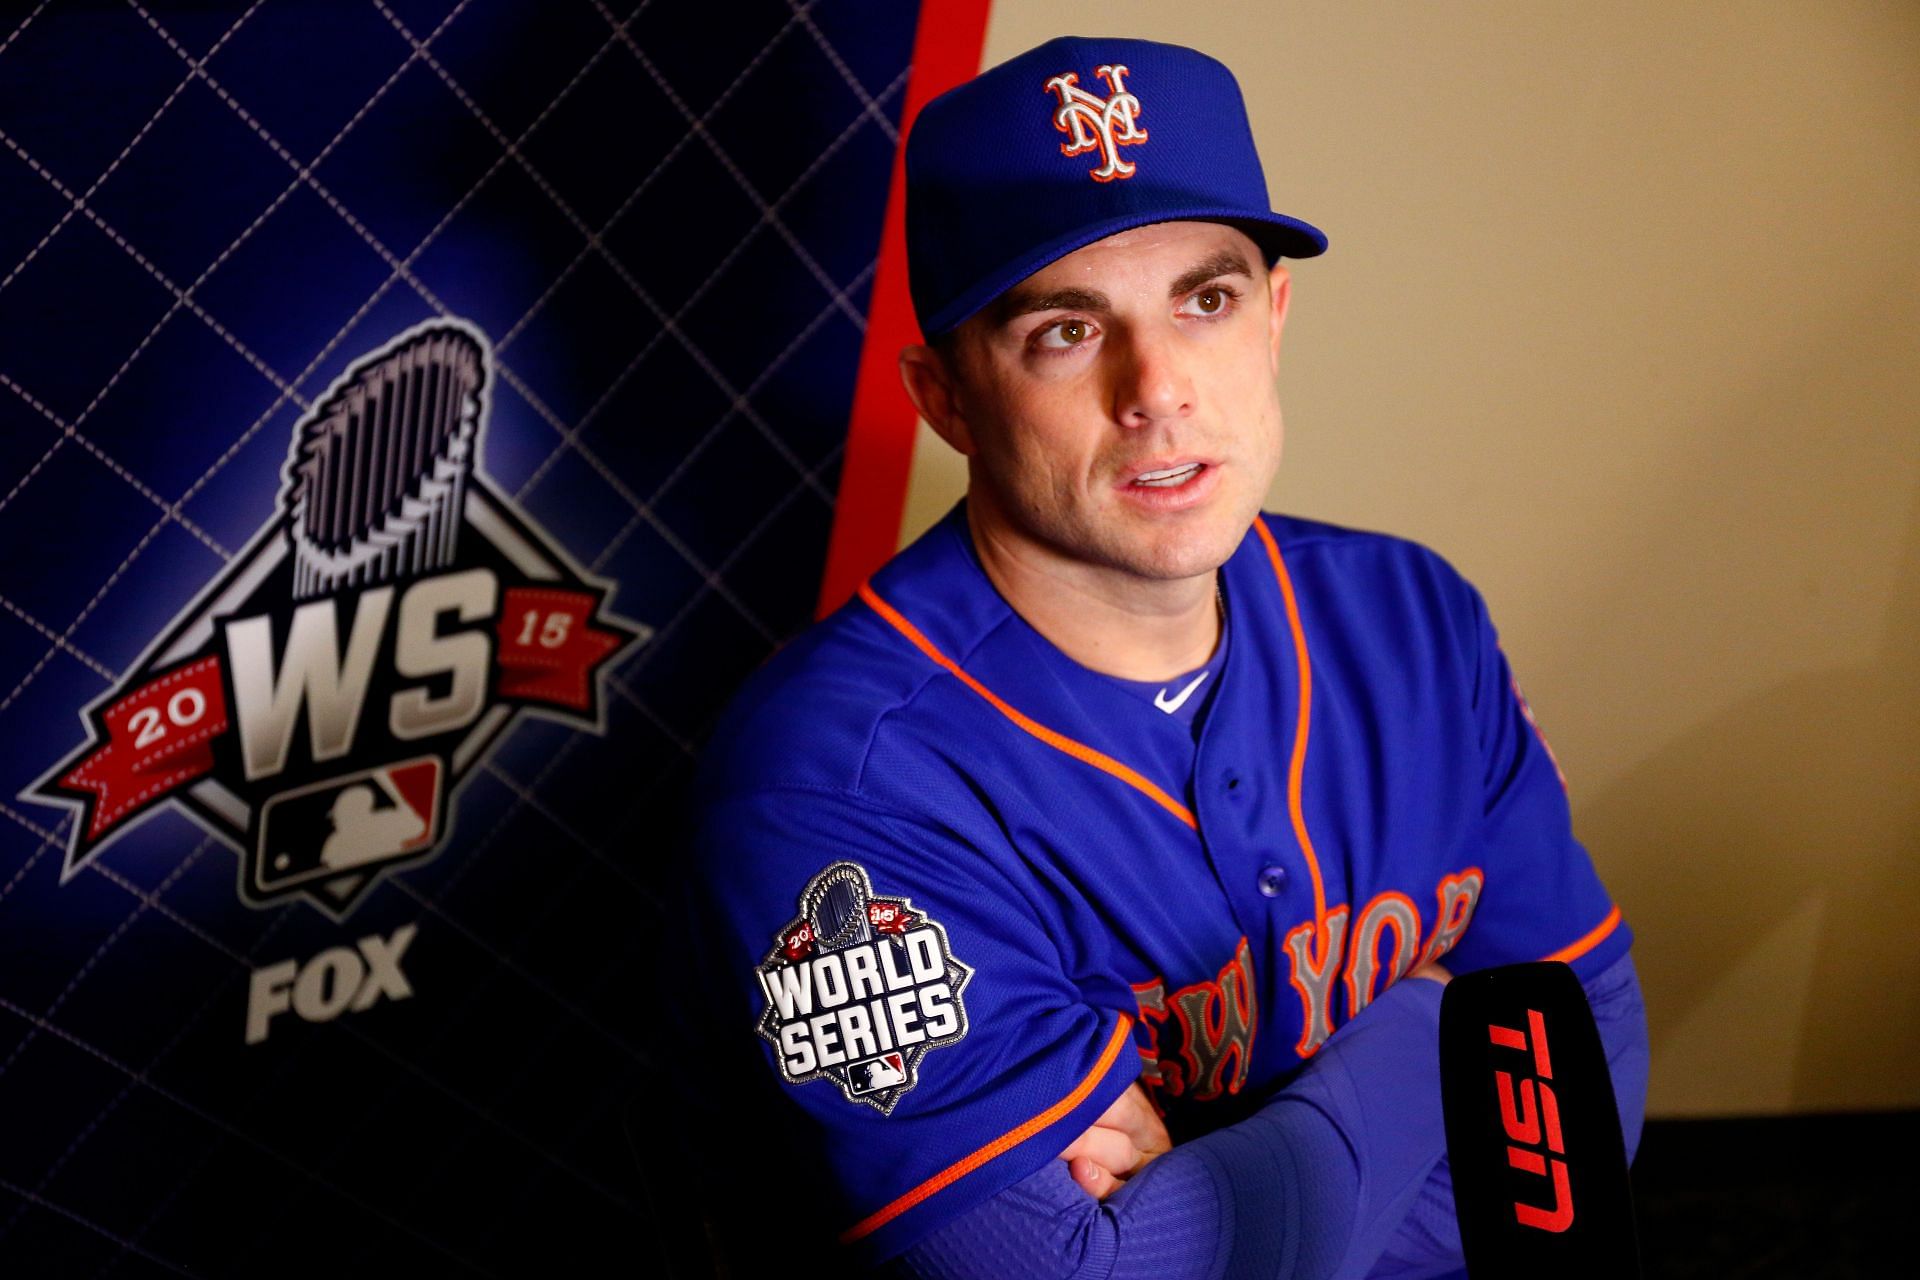 Some guy in a Mets NYPD cap just flagged me down on the street near the  ballpark. Turns out it was David Wright - New York Mets fan favorite David  Wright makes